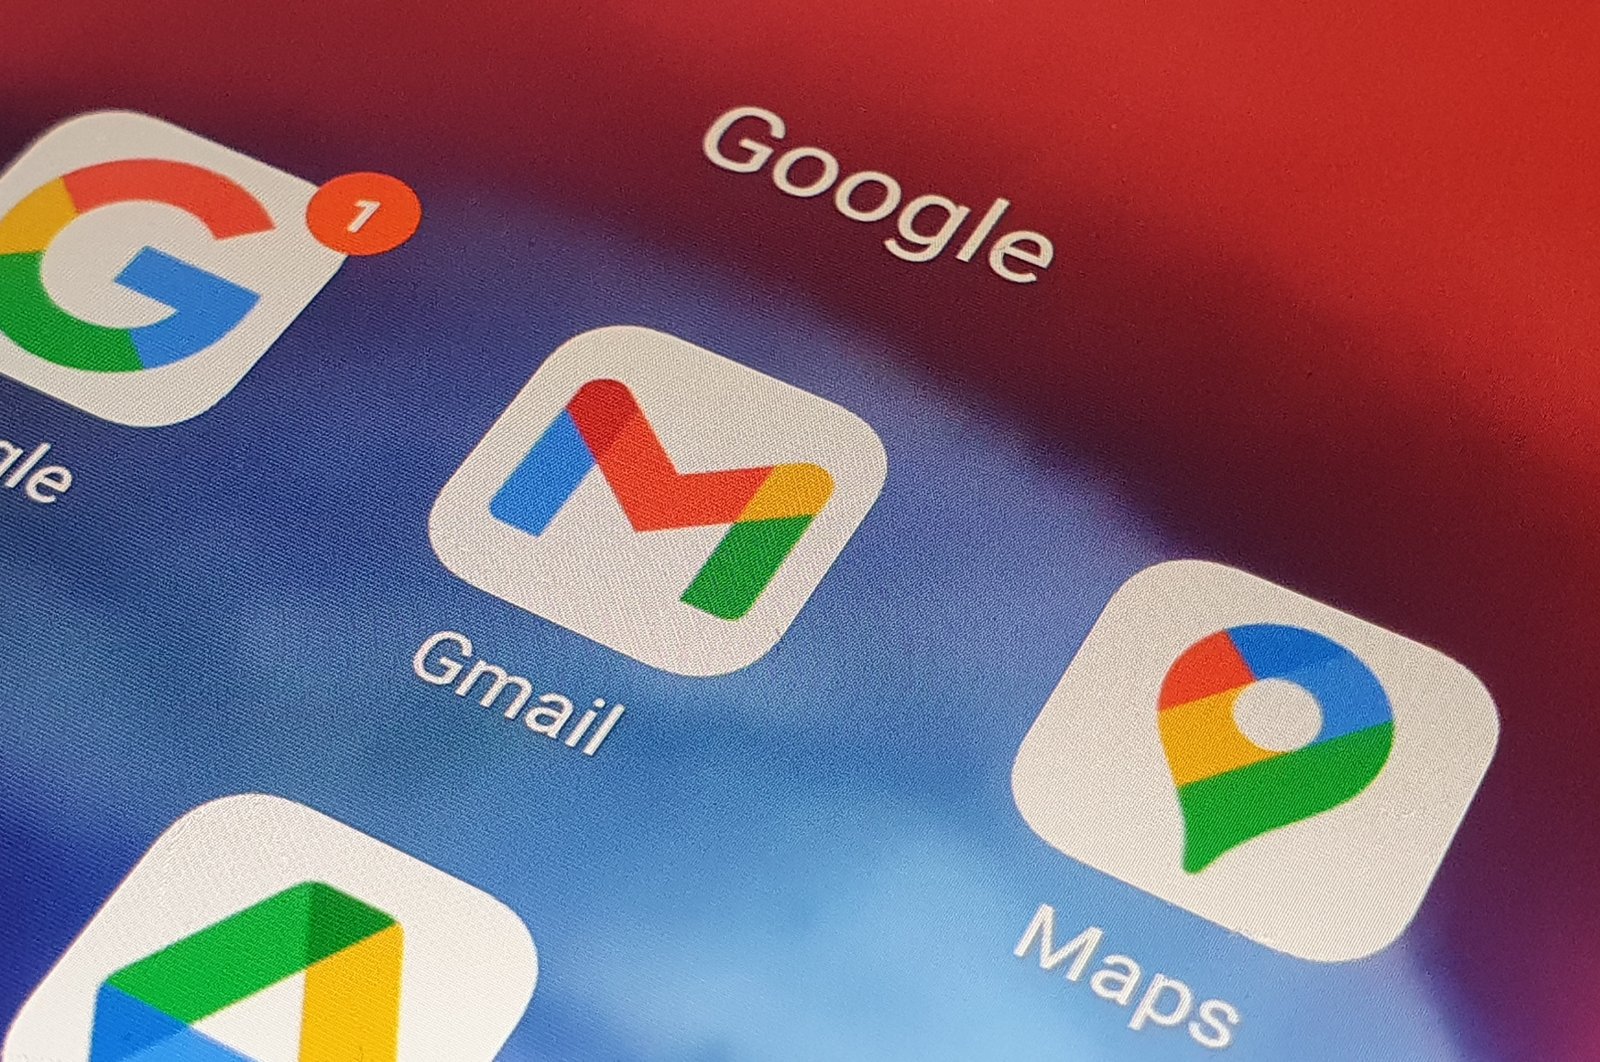 New Google, Gmail (C), and Maps icons are seen in this photo taken in Naples, Italy, October 2020. (Shutterstock Photo)